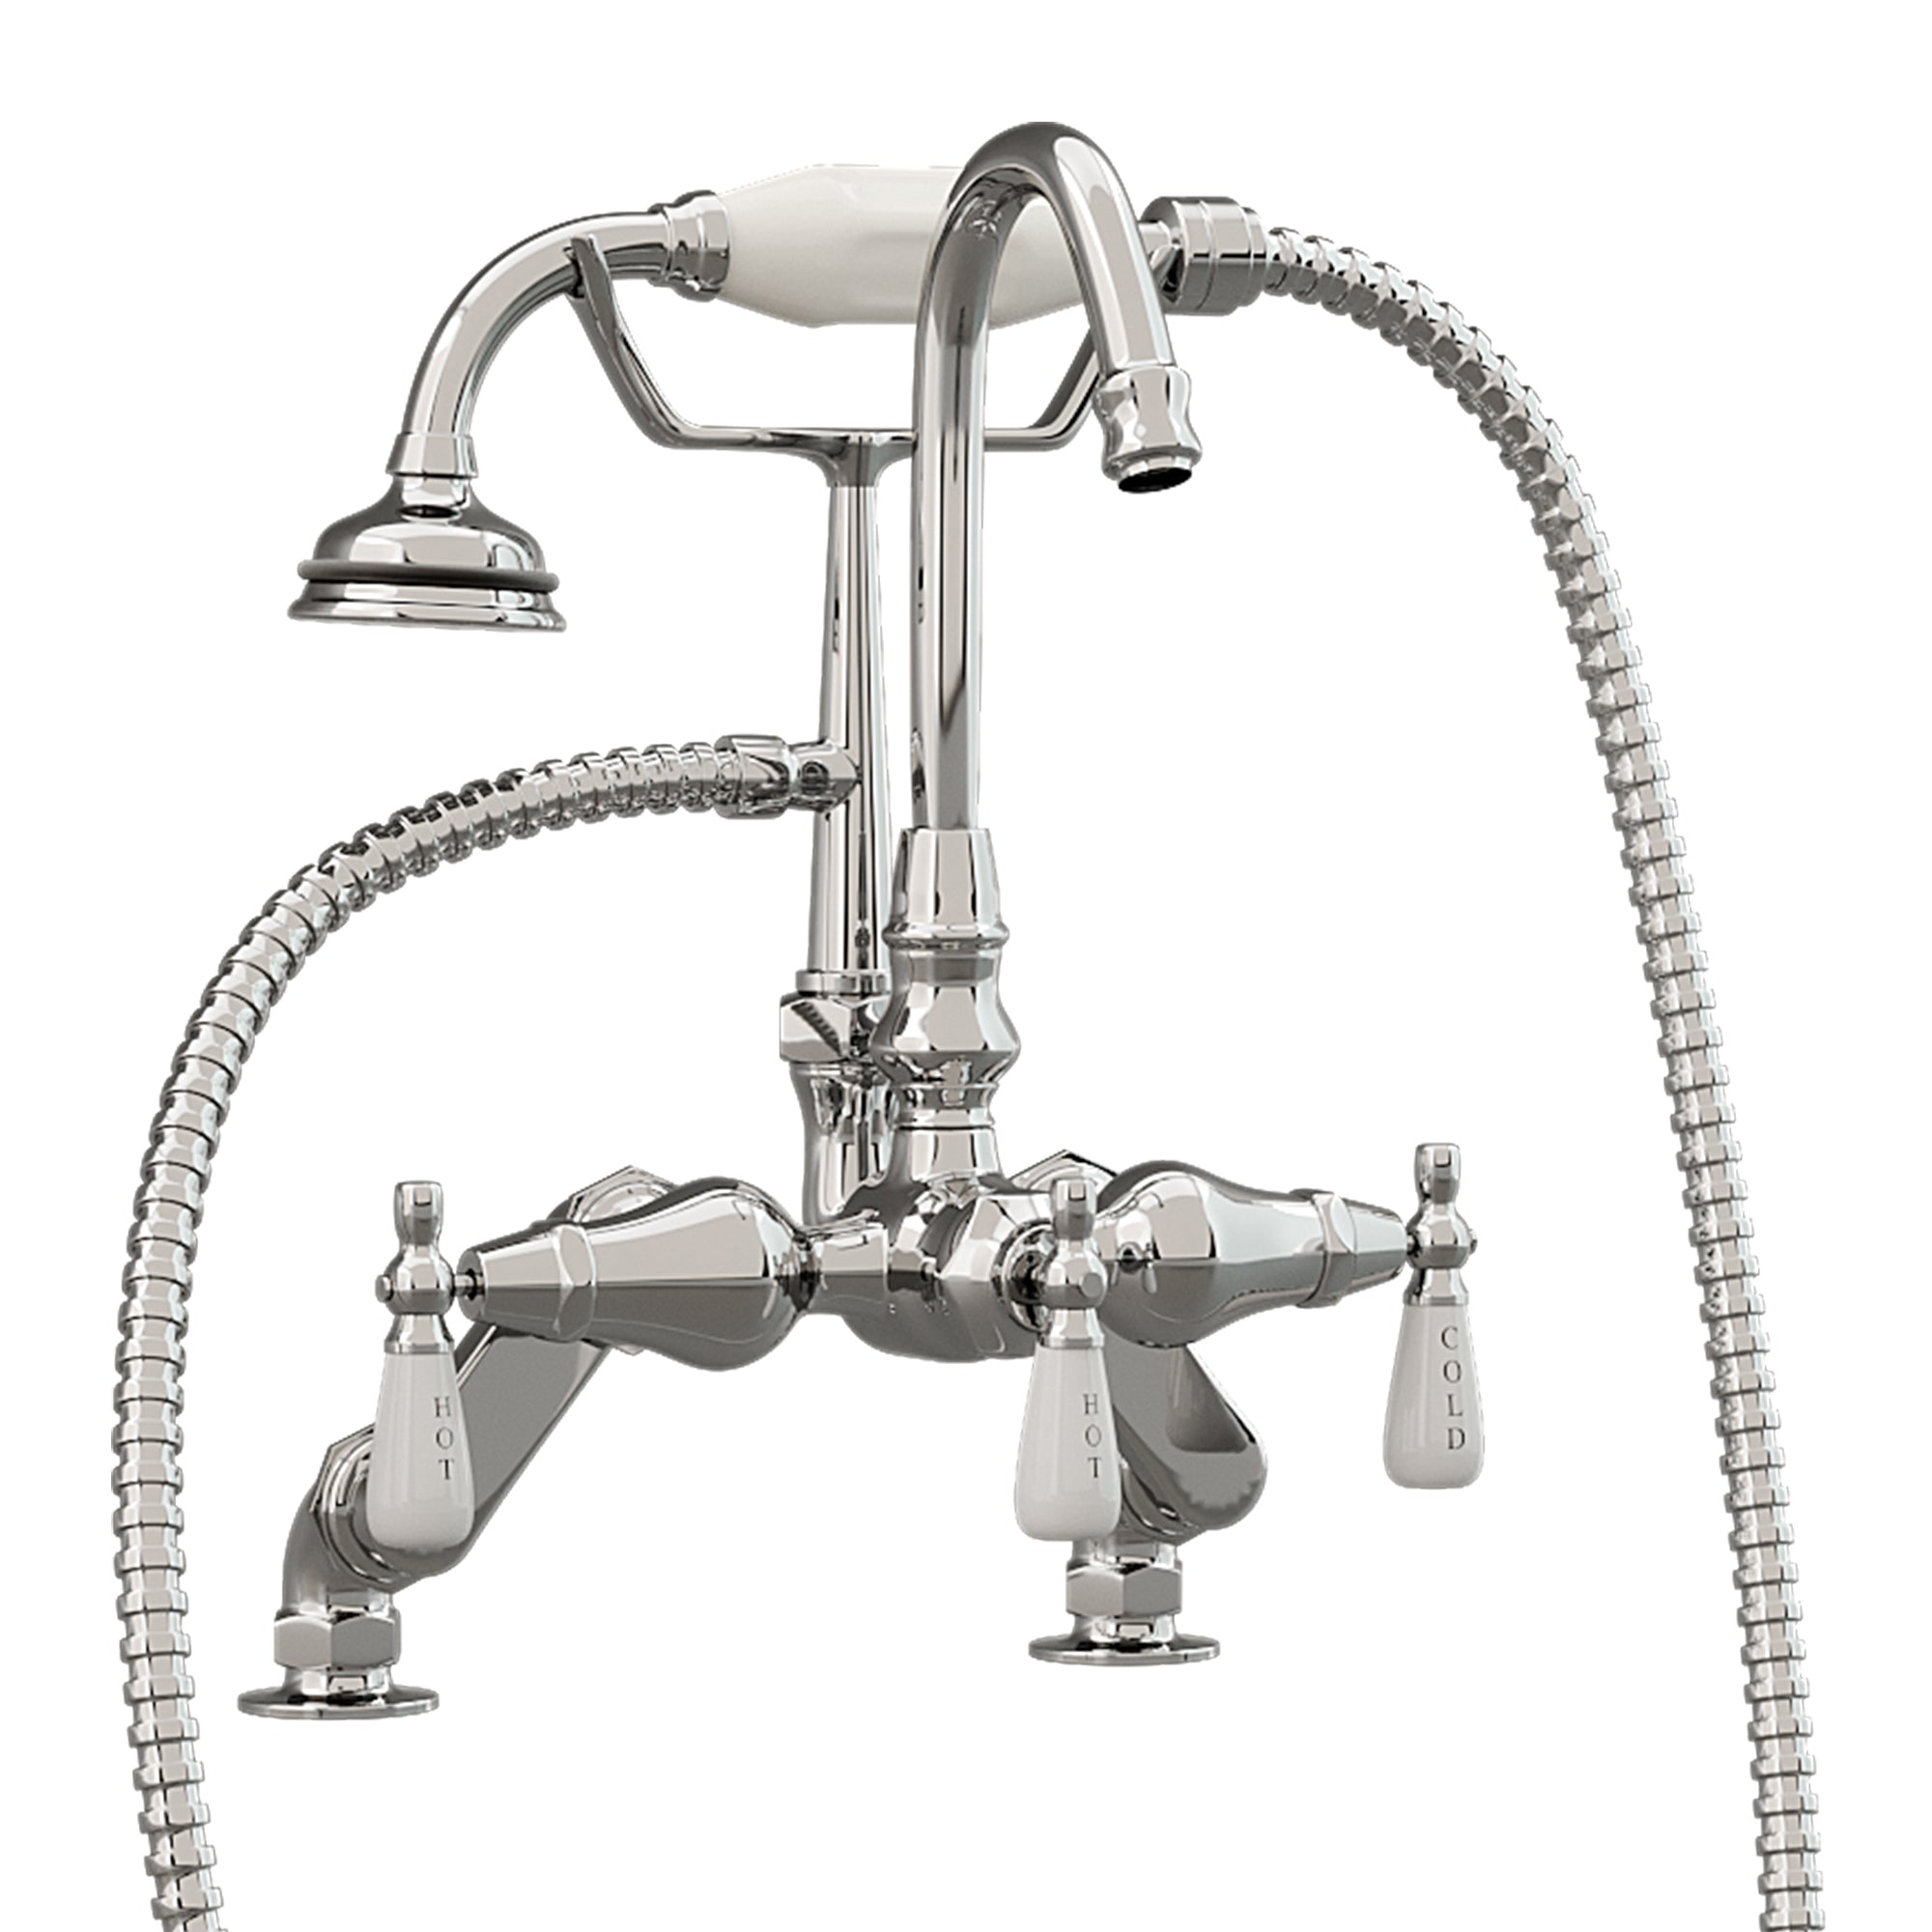 Cambridge Plumbing Clawfoot Tub Deck Mount Porcelain Lever English Telephone Brass Faucet with Hand Held Shower - Brushed Nickel - CAM684D - Vital Hydrotherapy